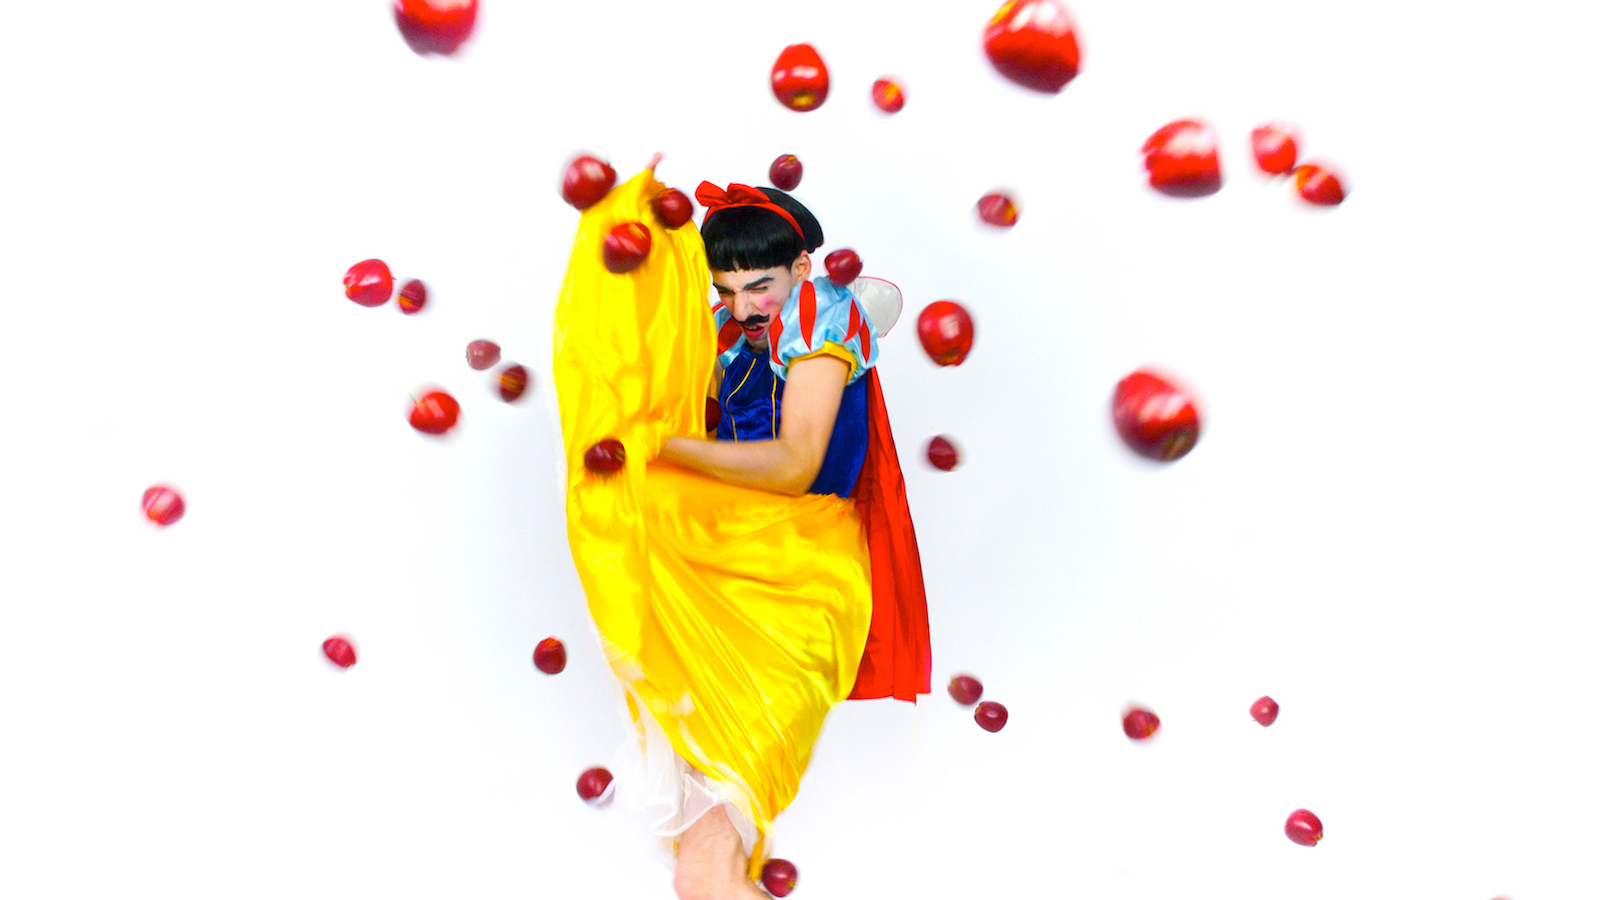 Nuno Roque as Disney's Snow White performing in My Cake - Bullying - Photography